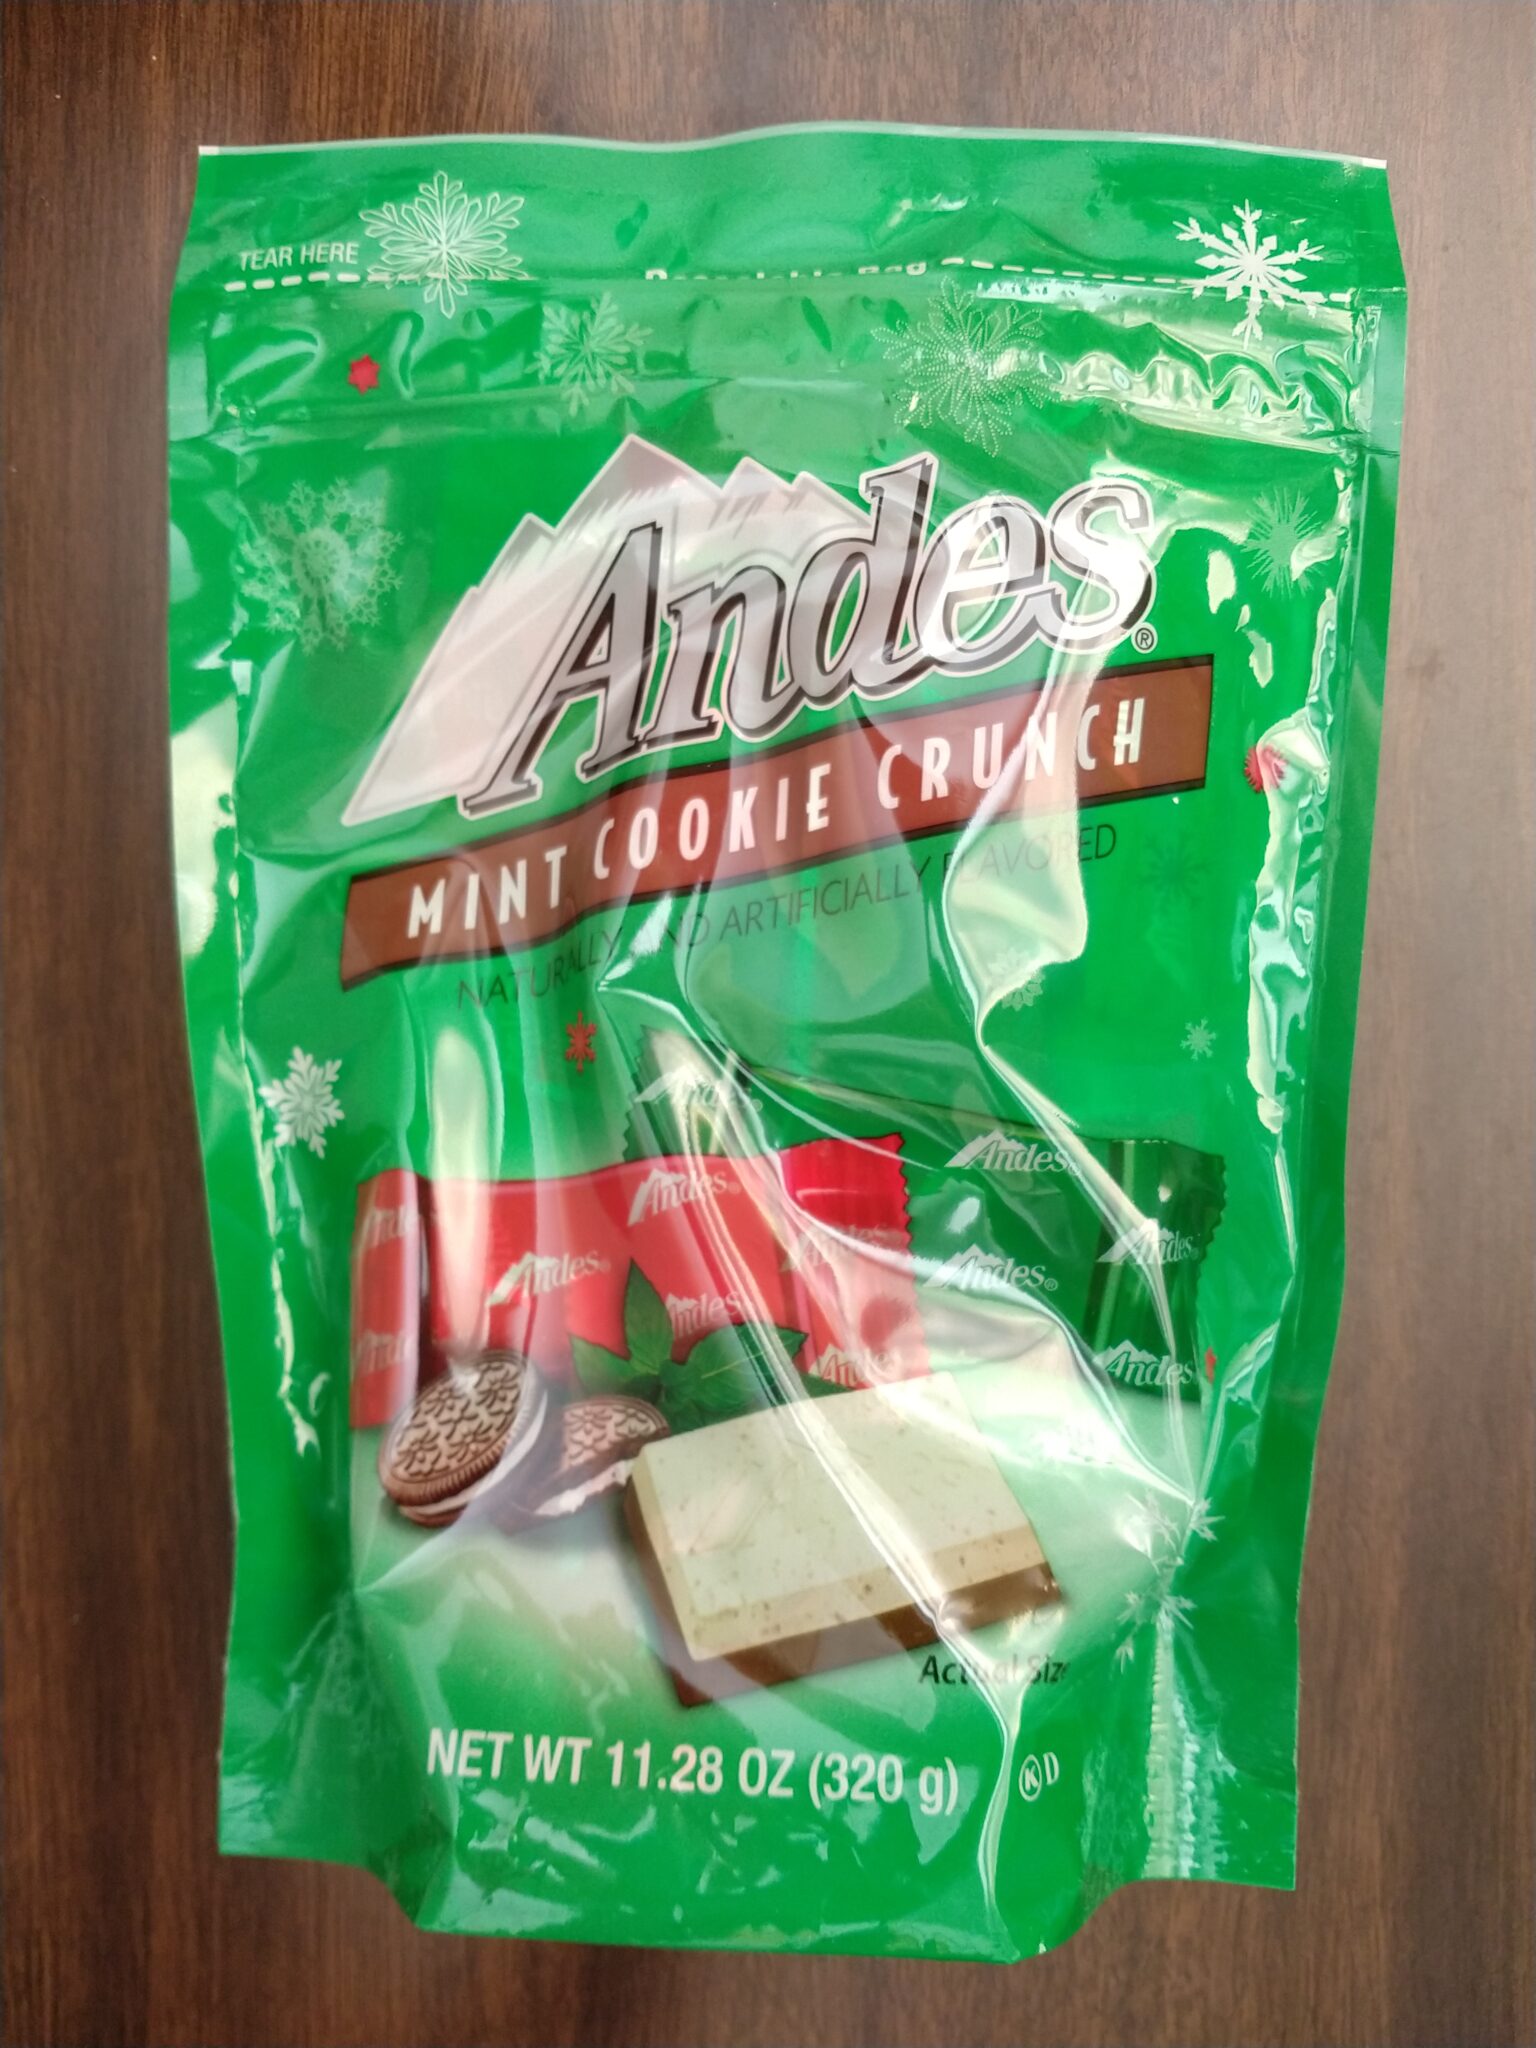 Andes – Mint Cookie Crunch